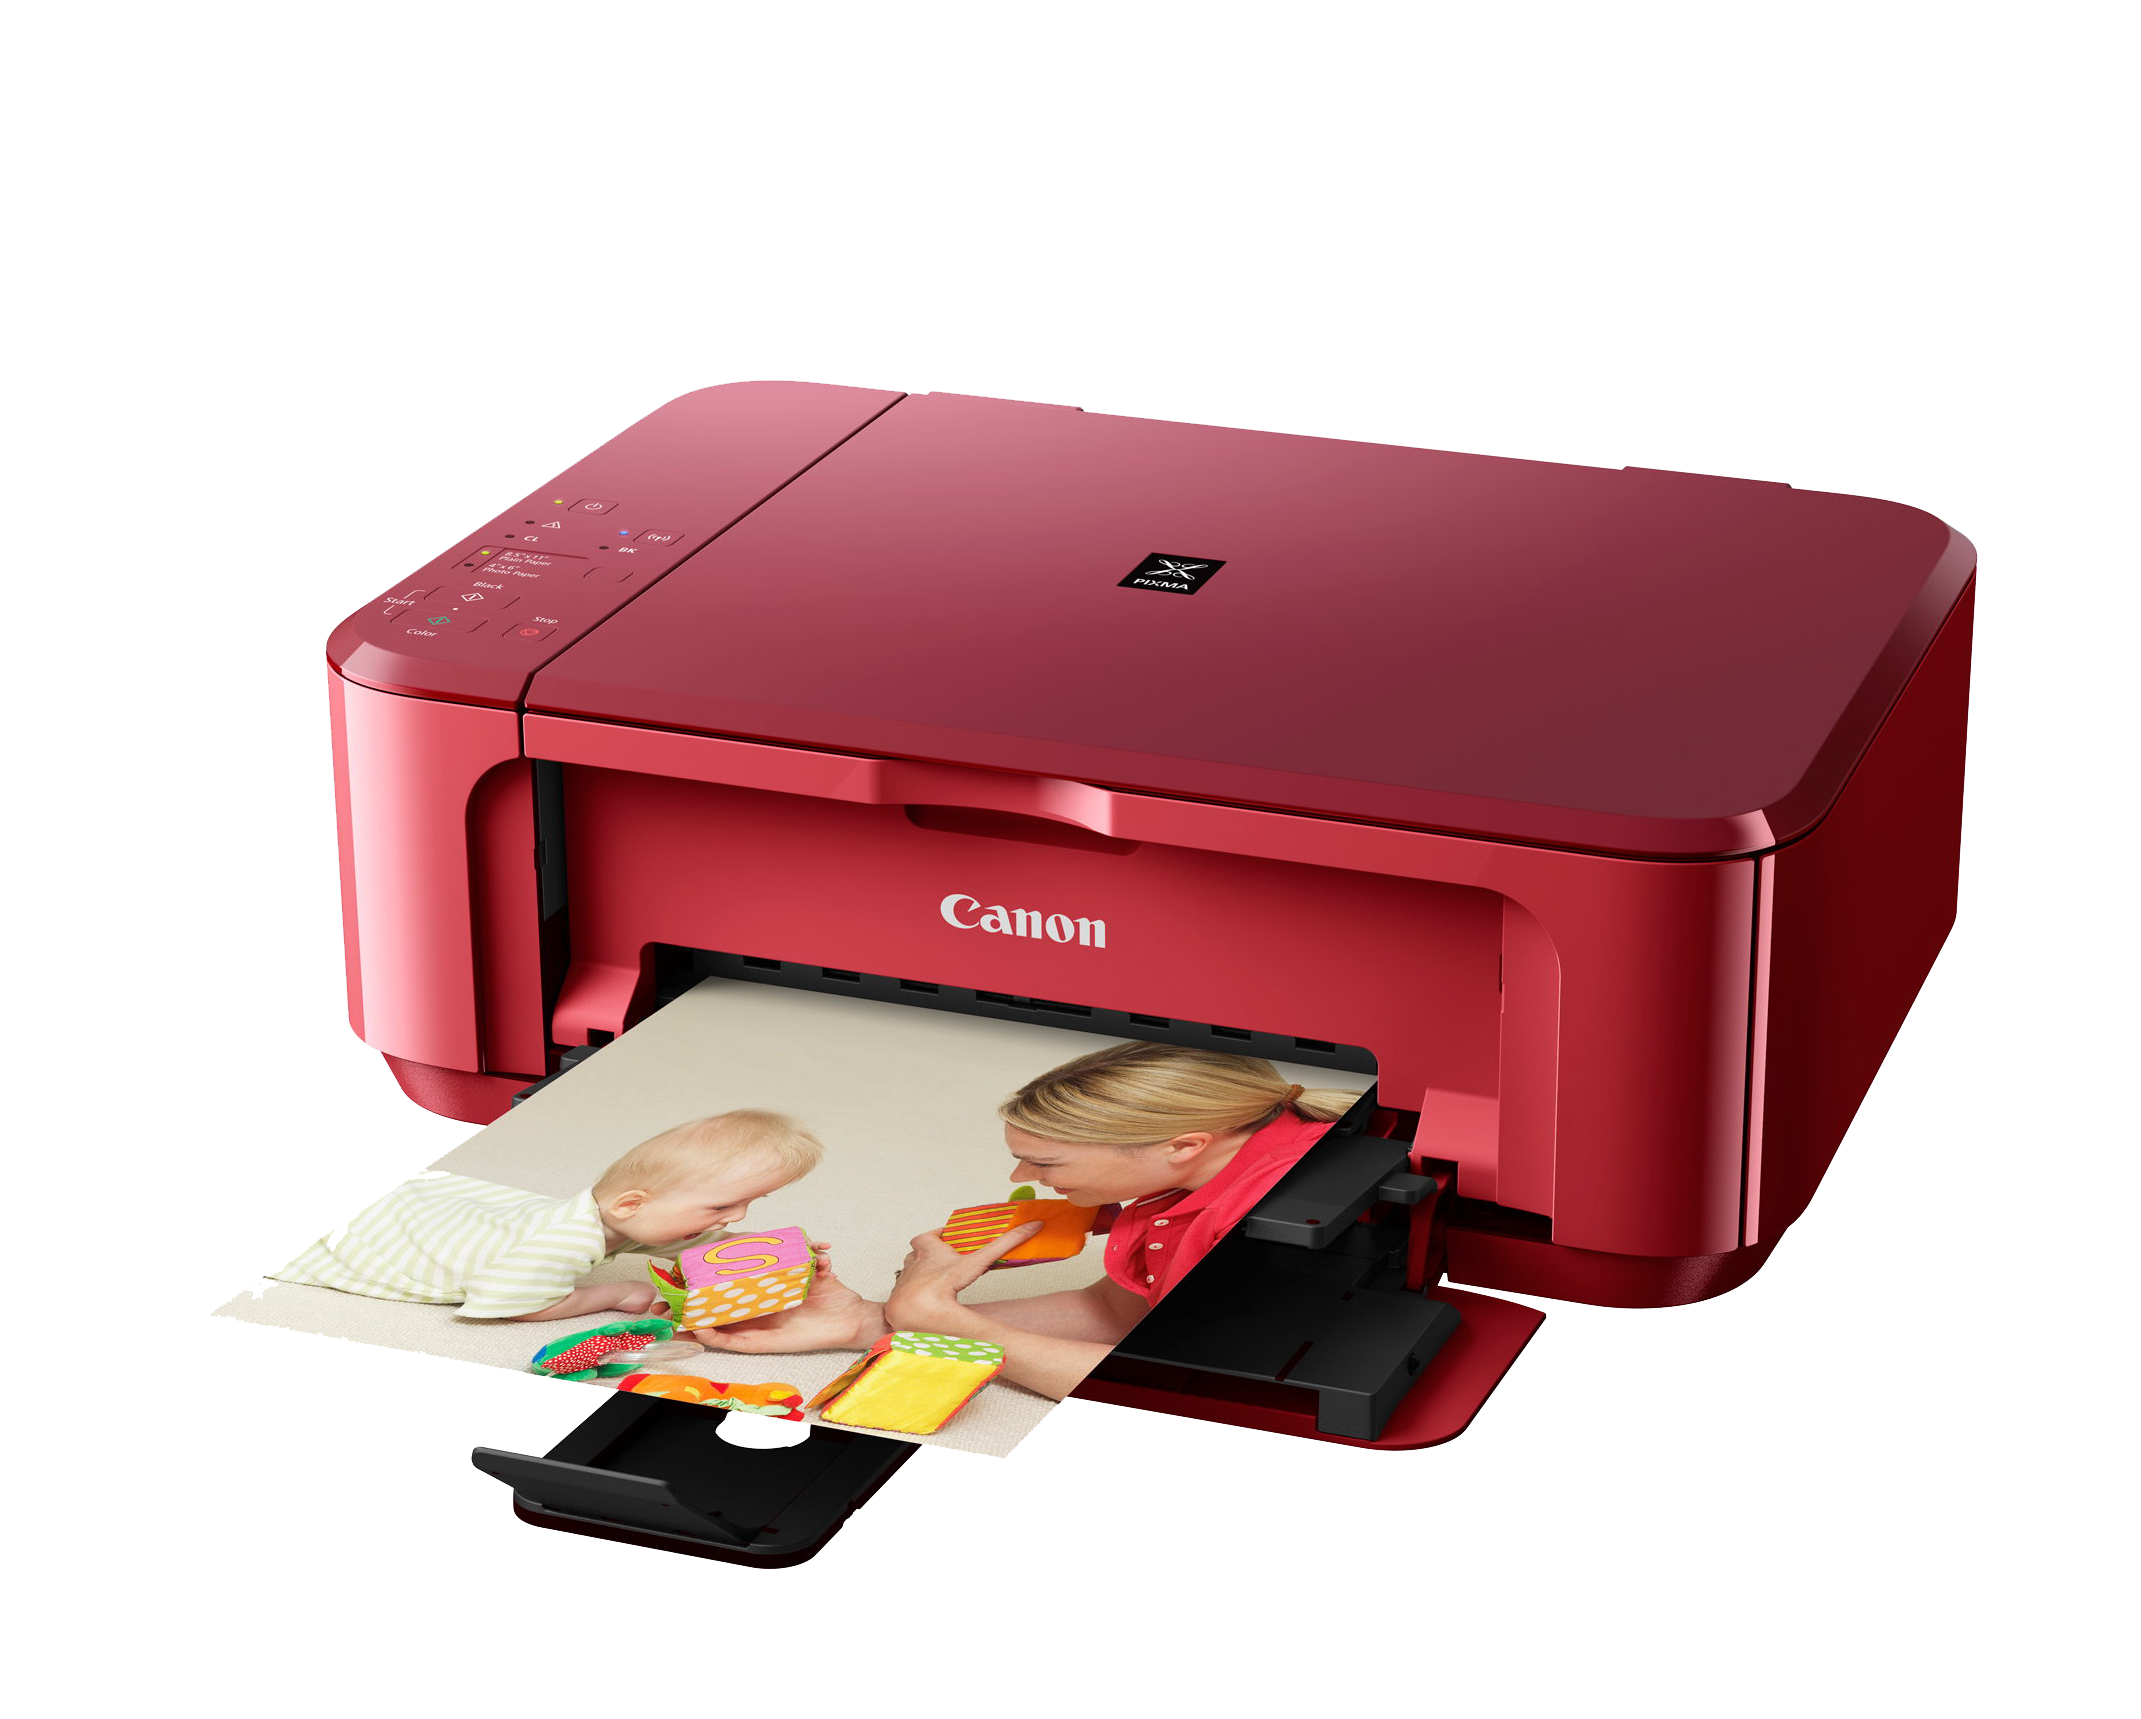 Red Canon Printer PNG in Transparent pngteam.com